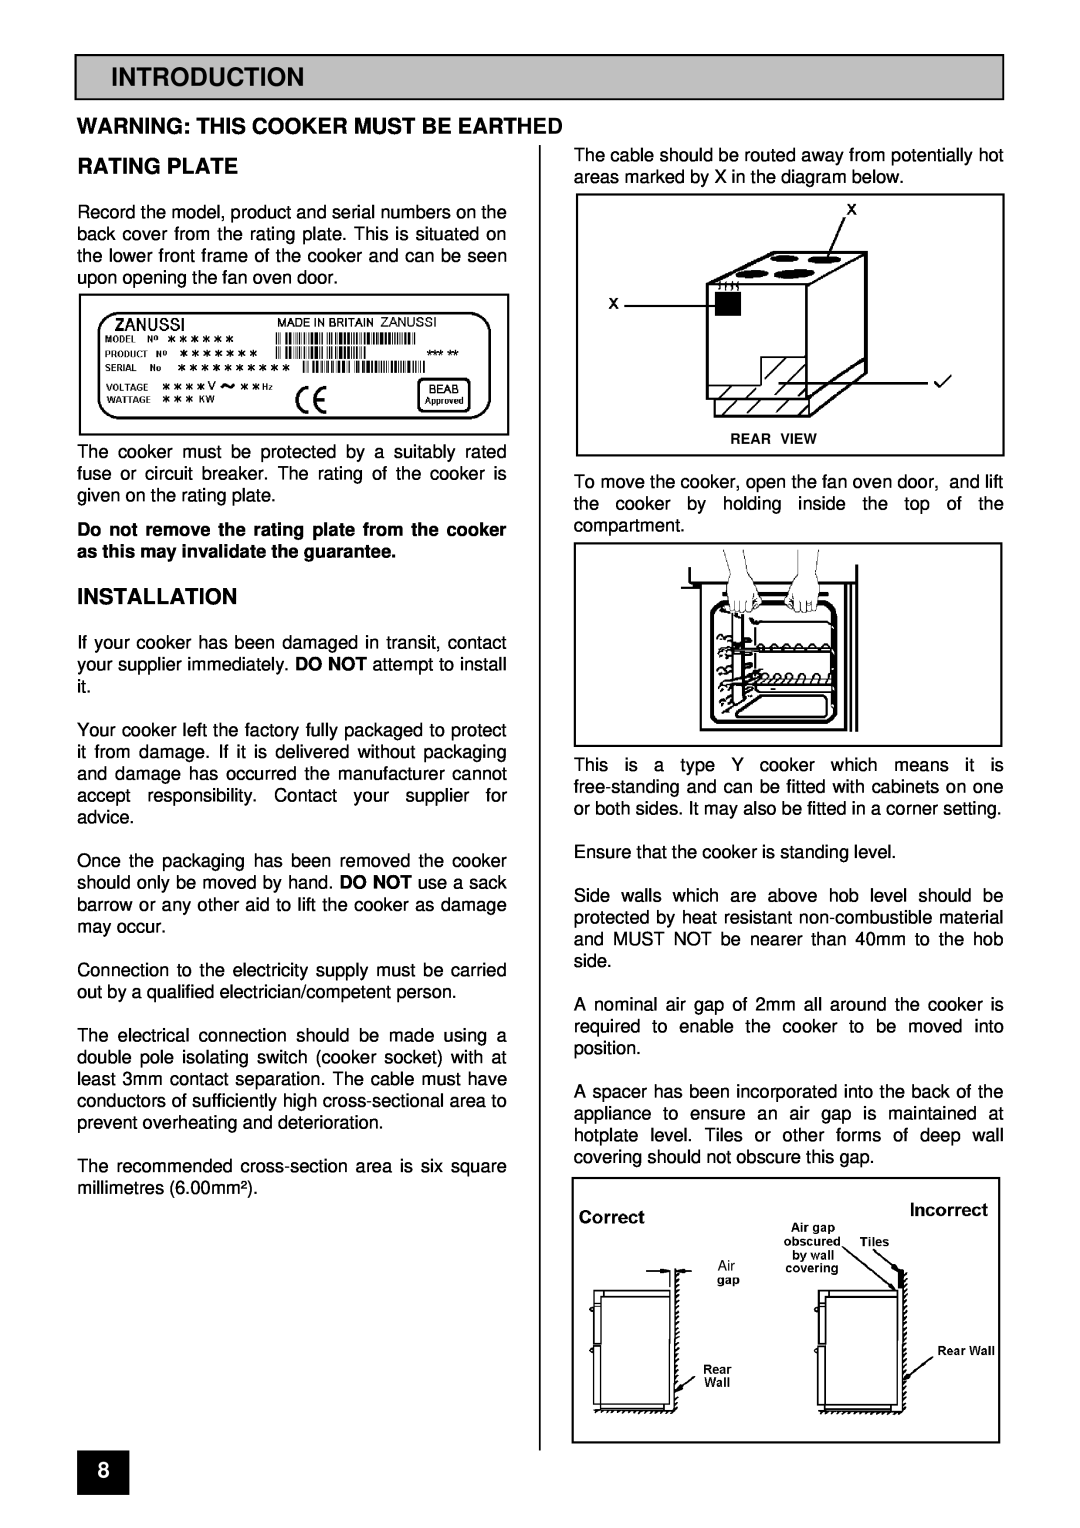 Zanussi ZCE ID manual Introduction, Warning This Cooker Must Be Earthed Rating Plate, Installation 